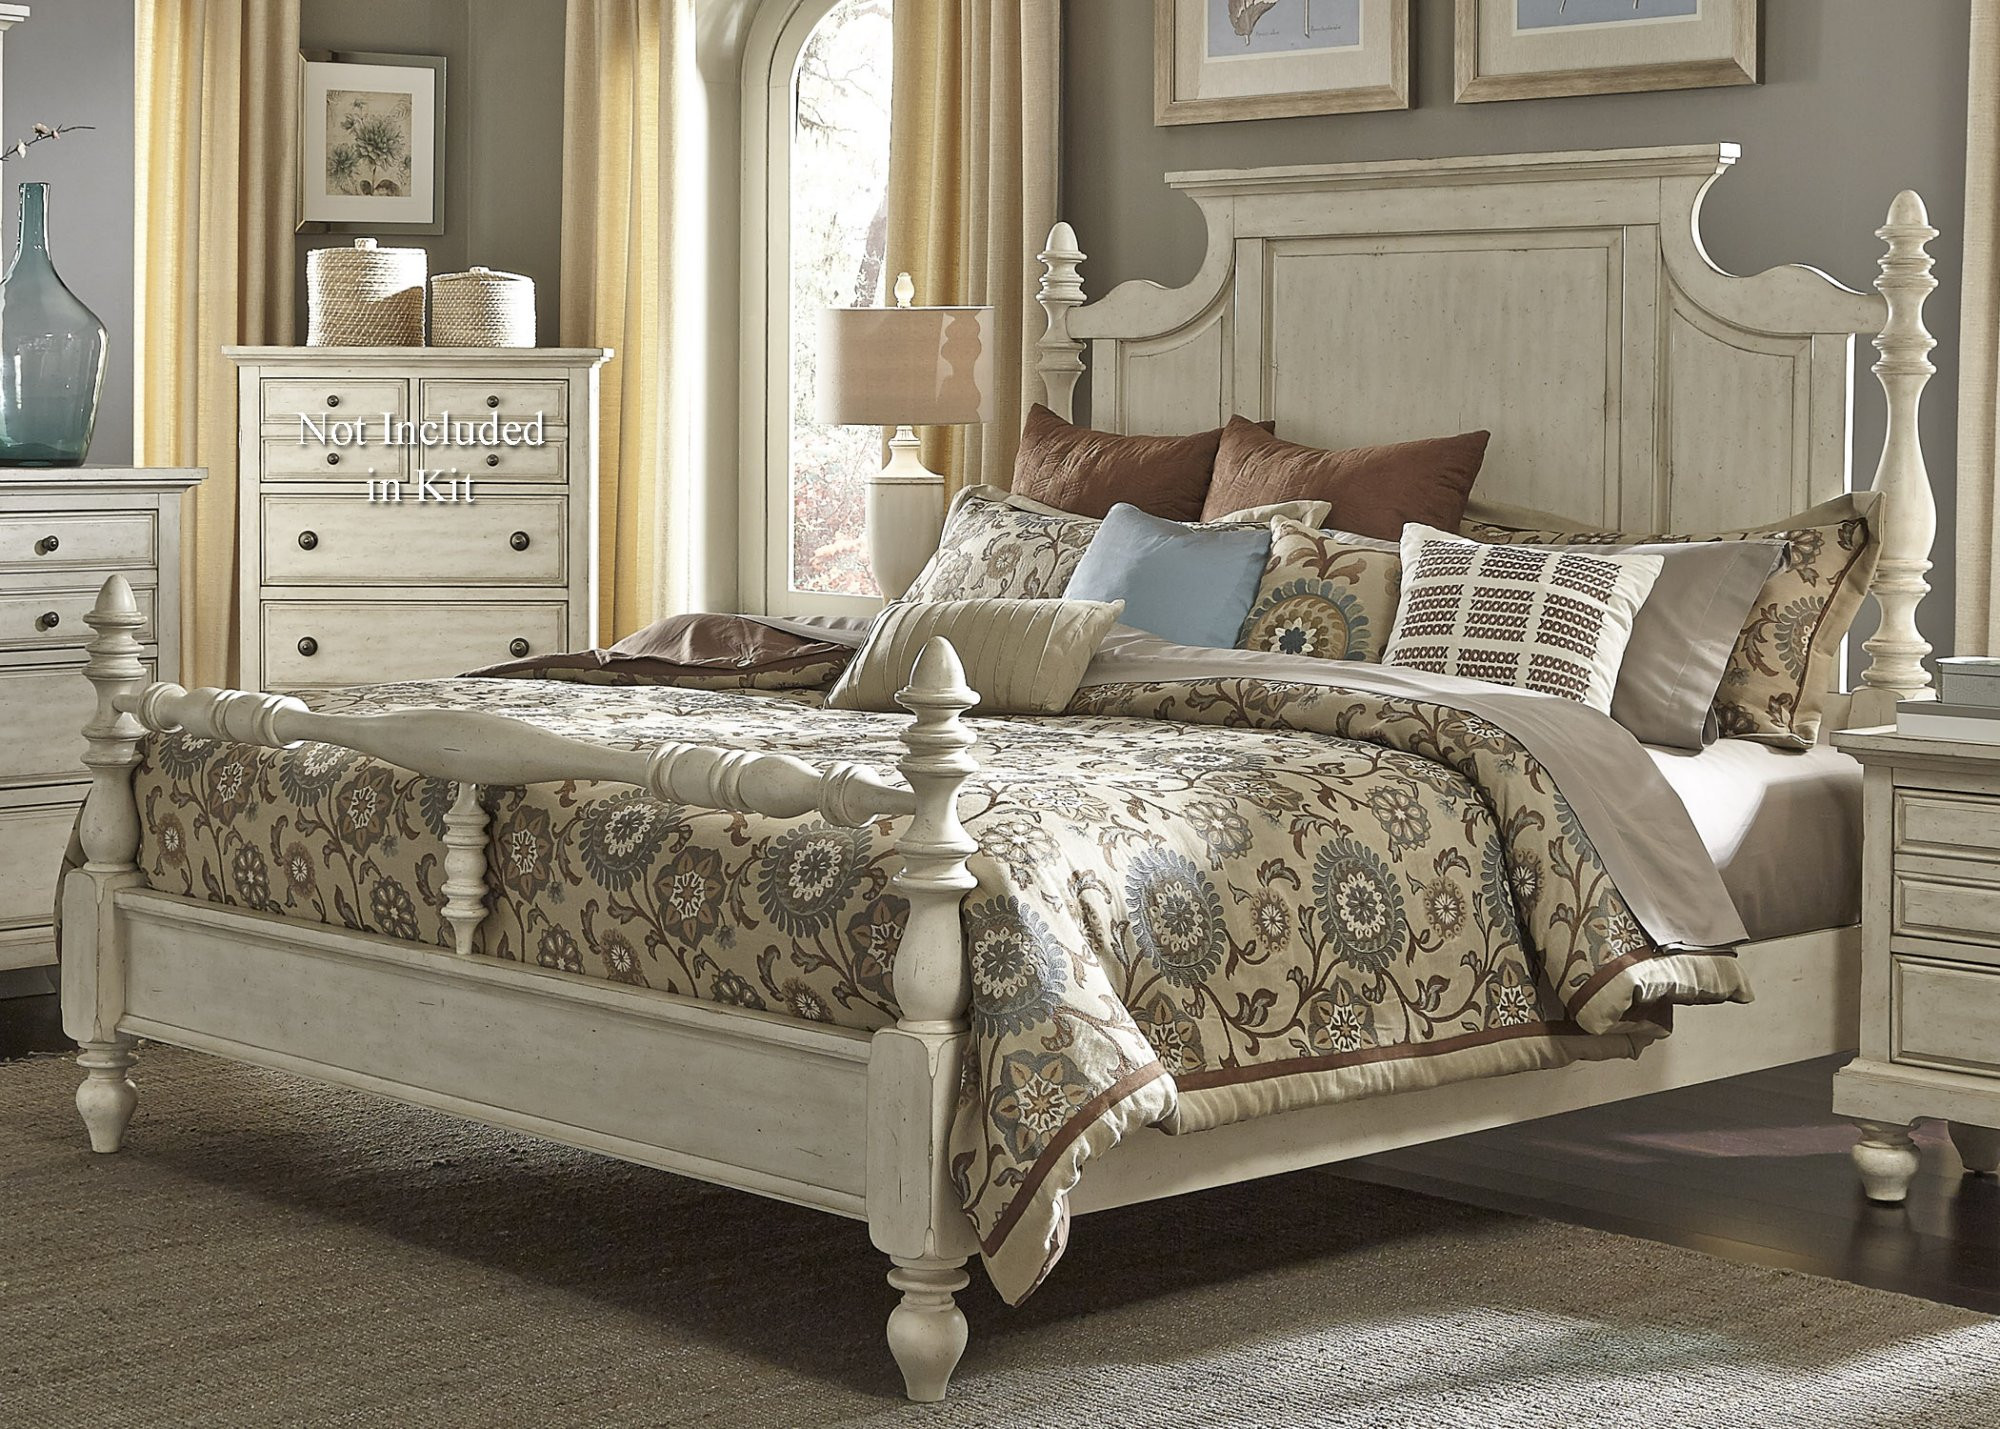 Liberty High Country Bedroom Queen Poster Bed 697-BR-QPS (01/02/90)